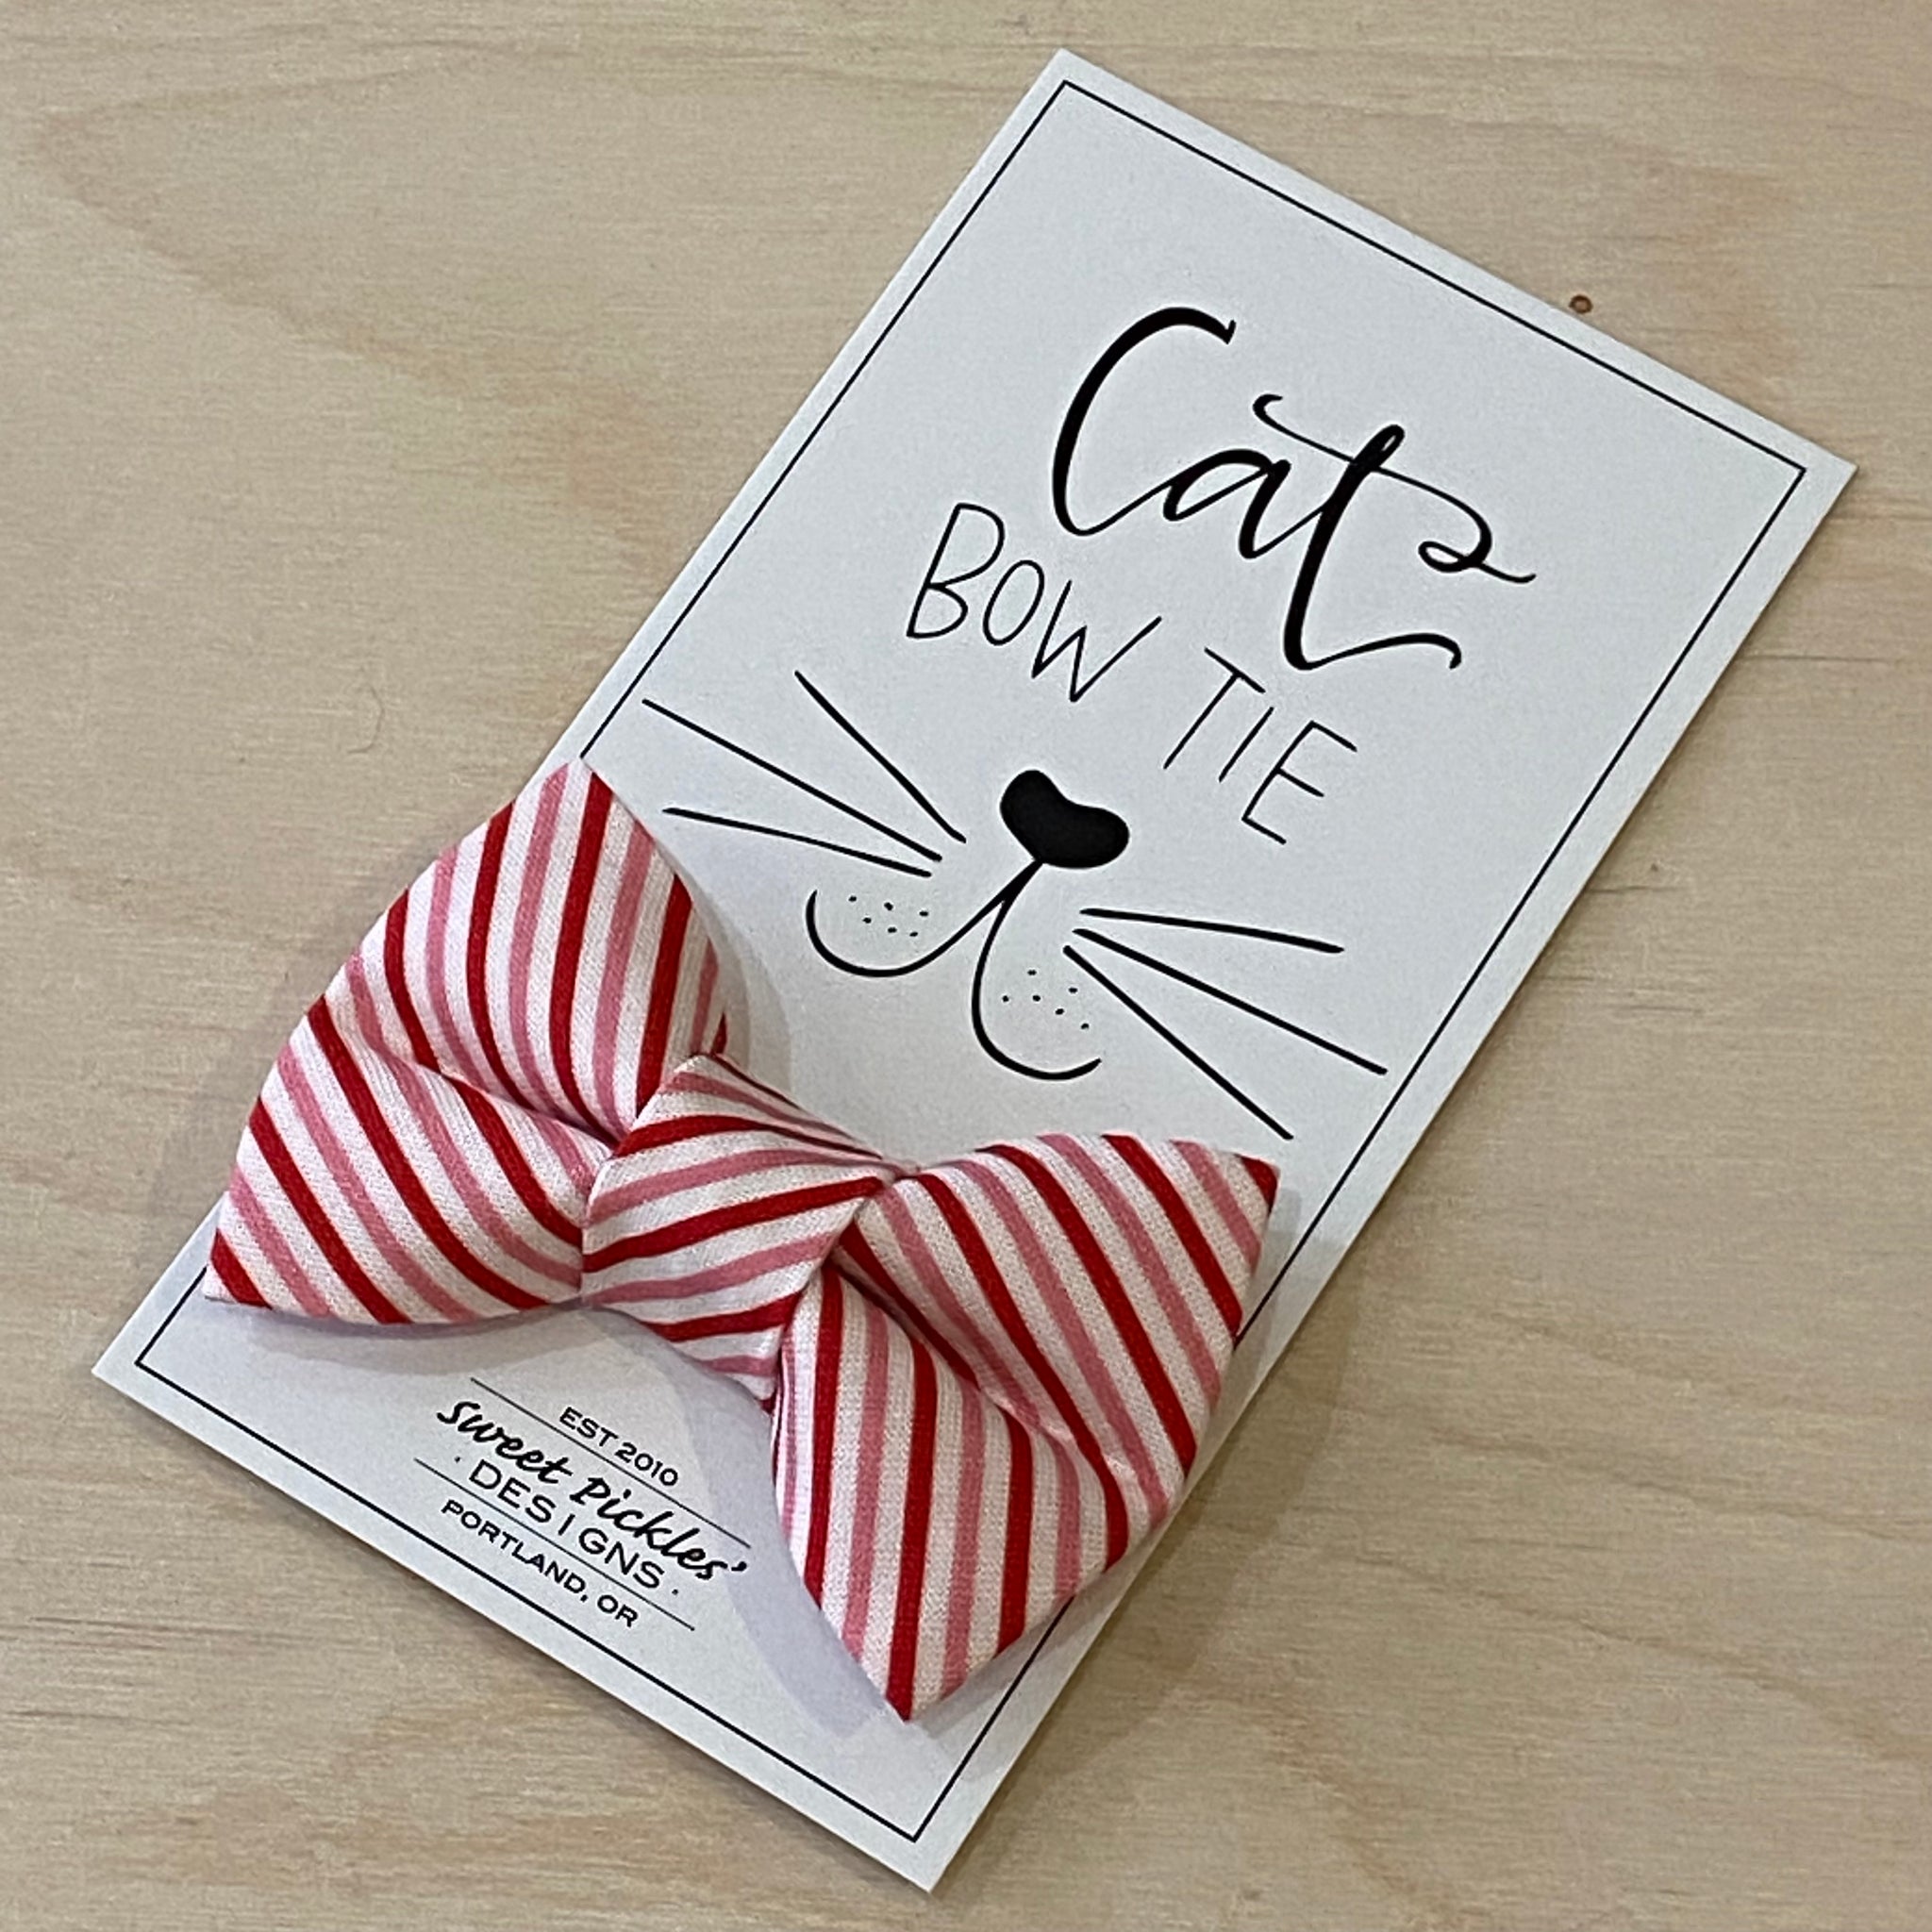 The Made You Look Cat Bow Tie